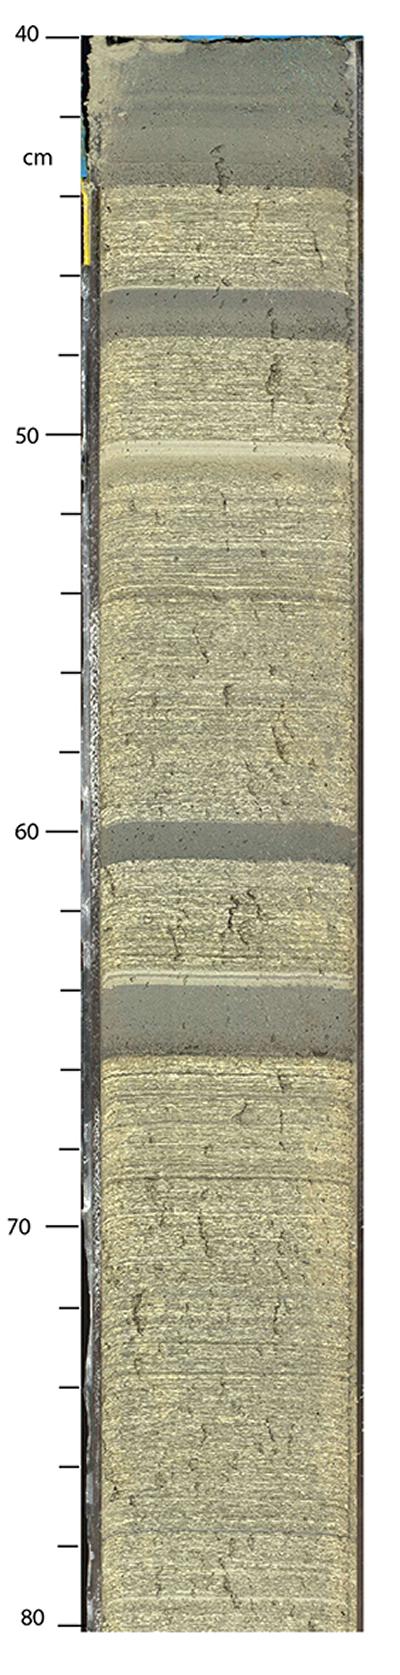 Example of sediment core collected during Exp. 381.